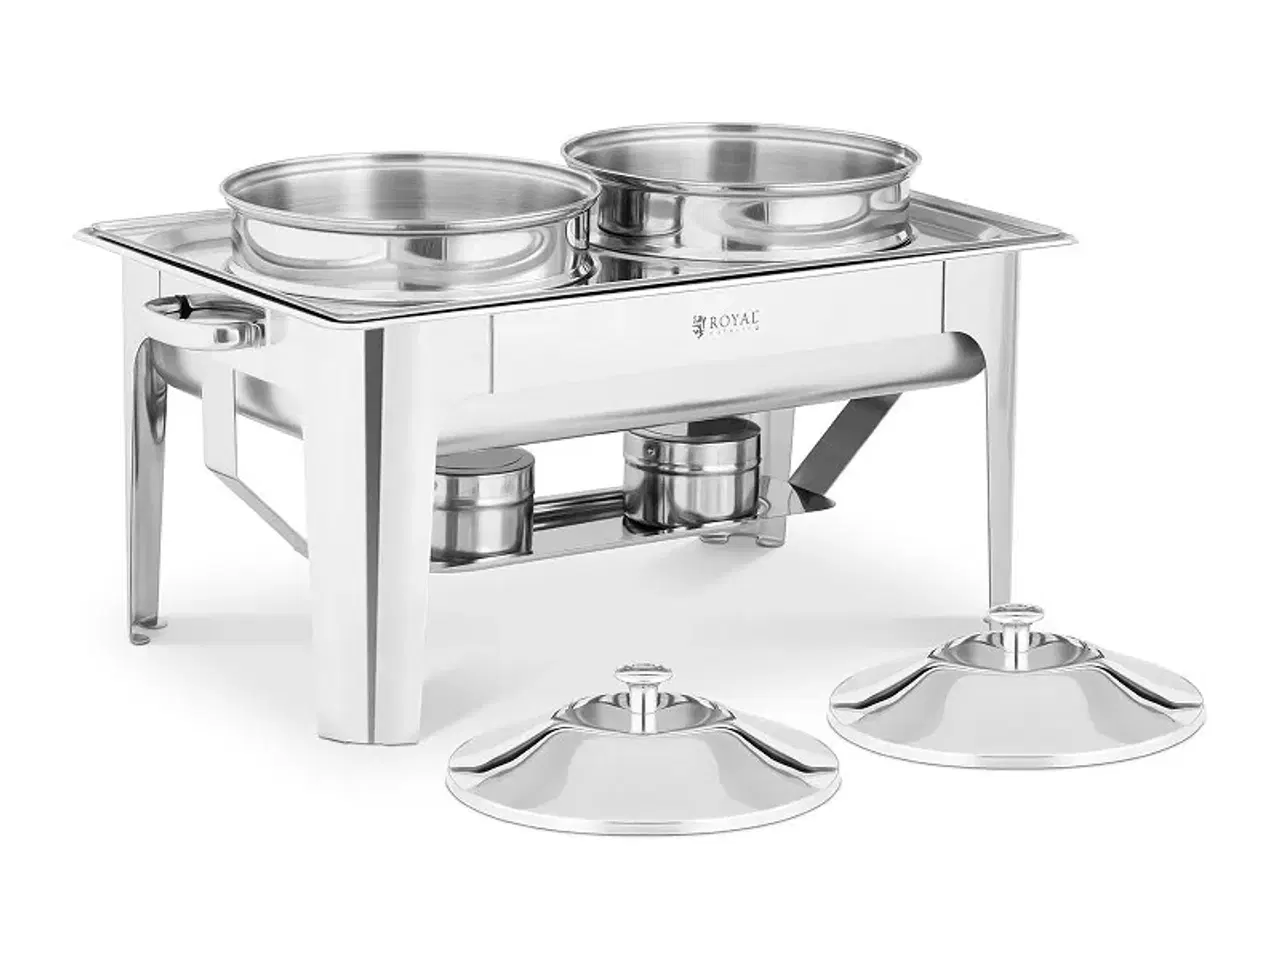 Billede 1 - Chafing dish – rund – 2 x 4,5 l – Royal Catering